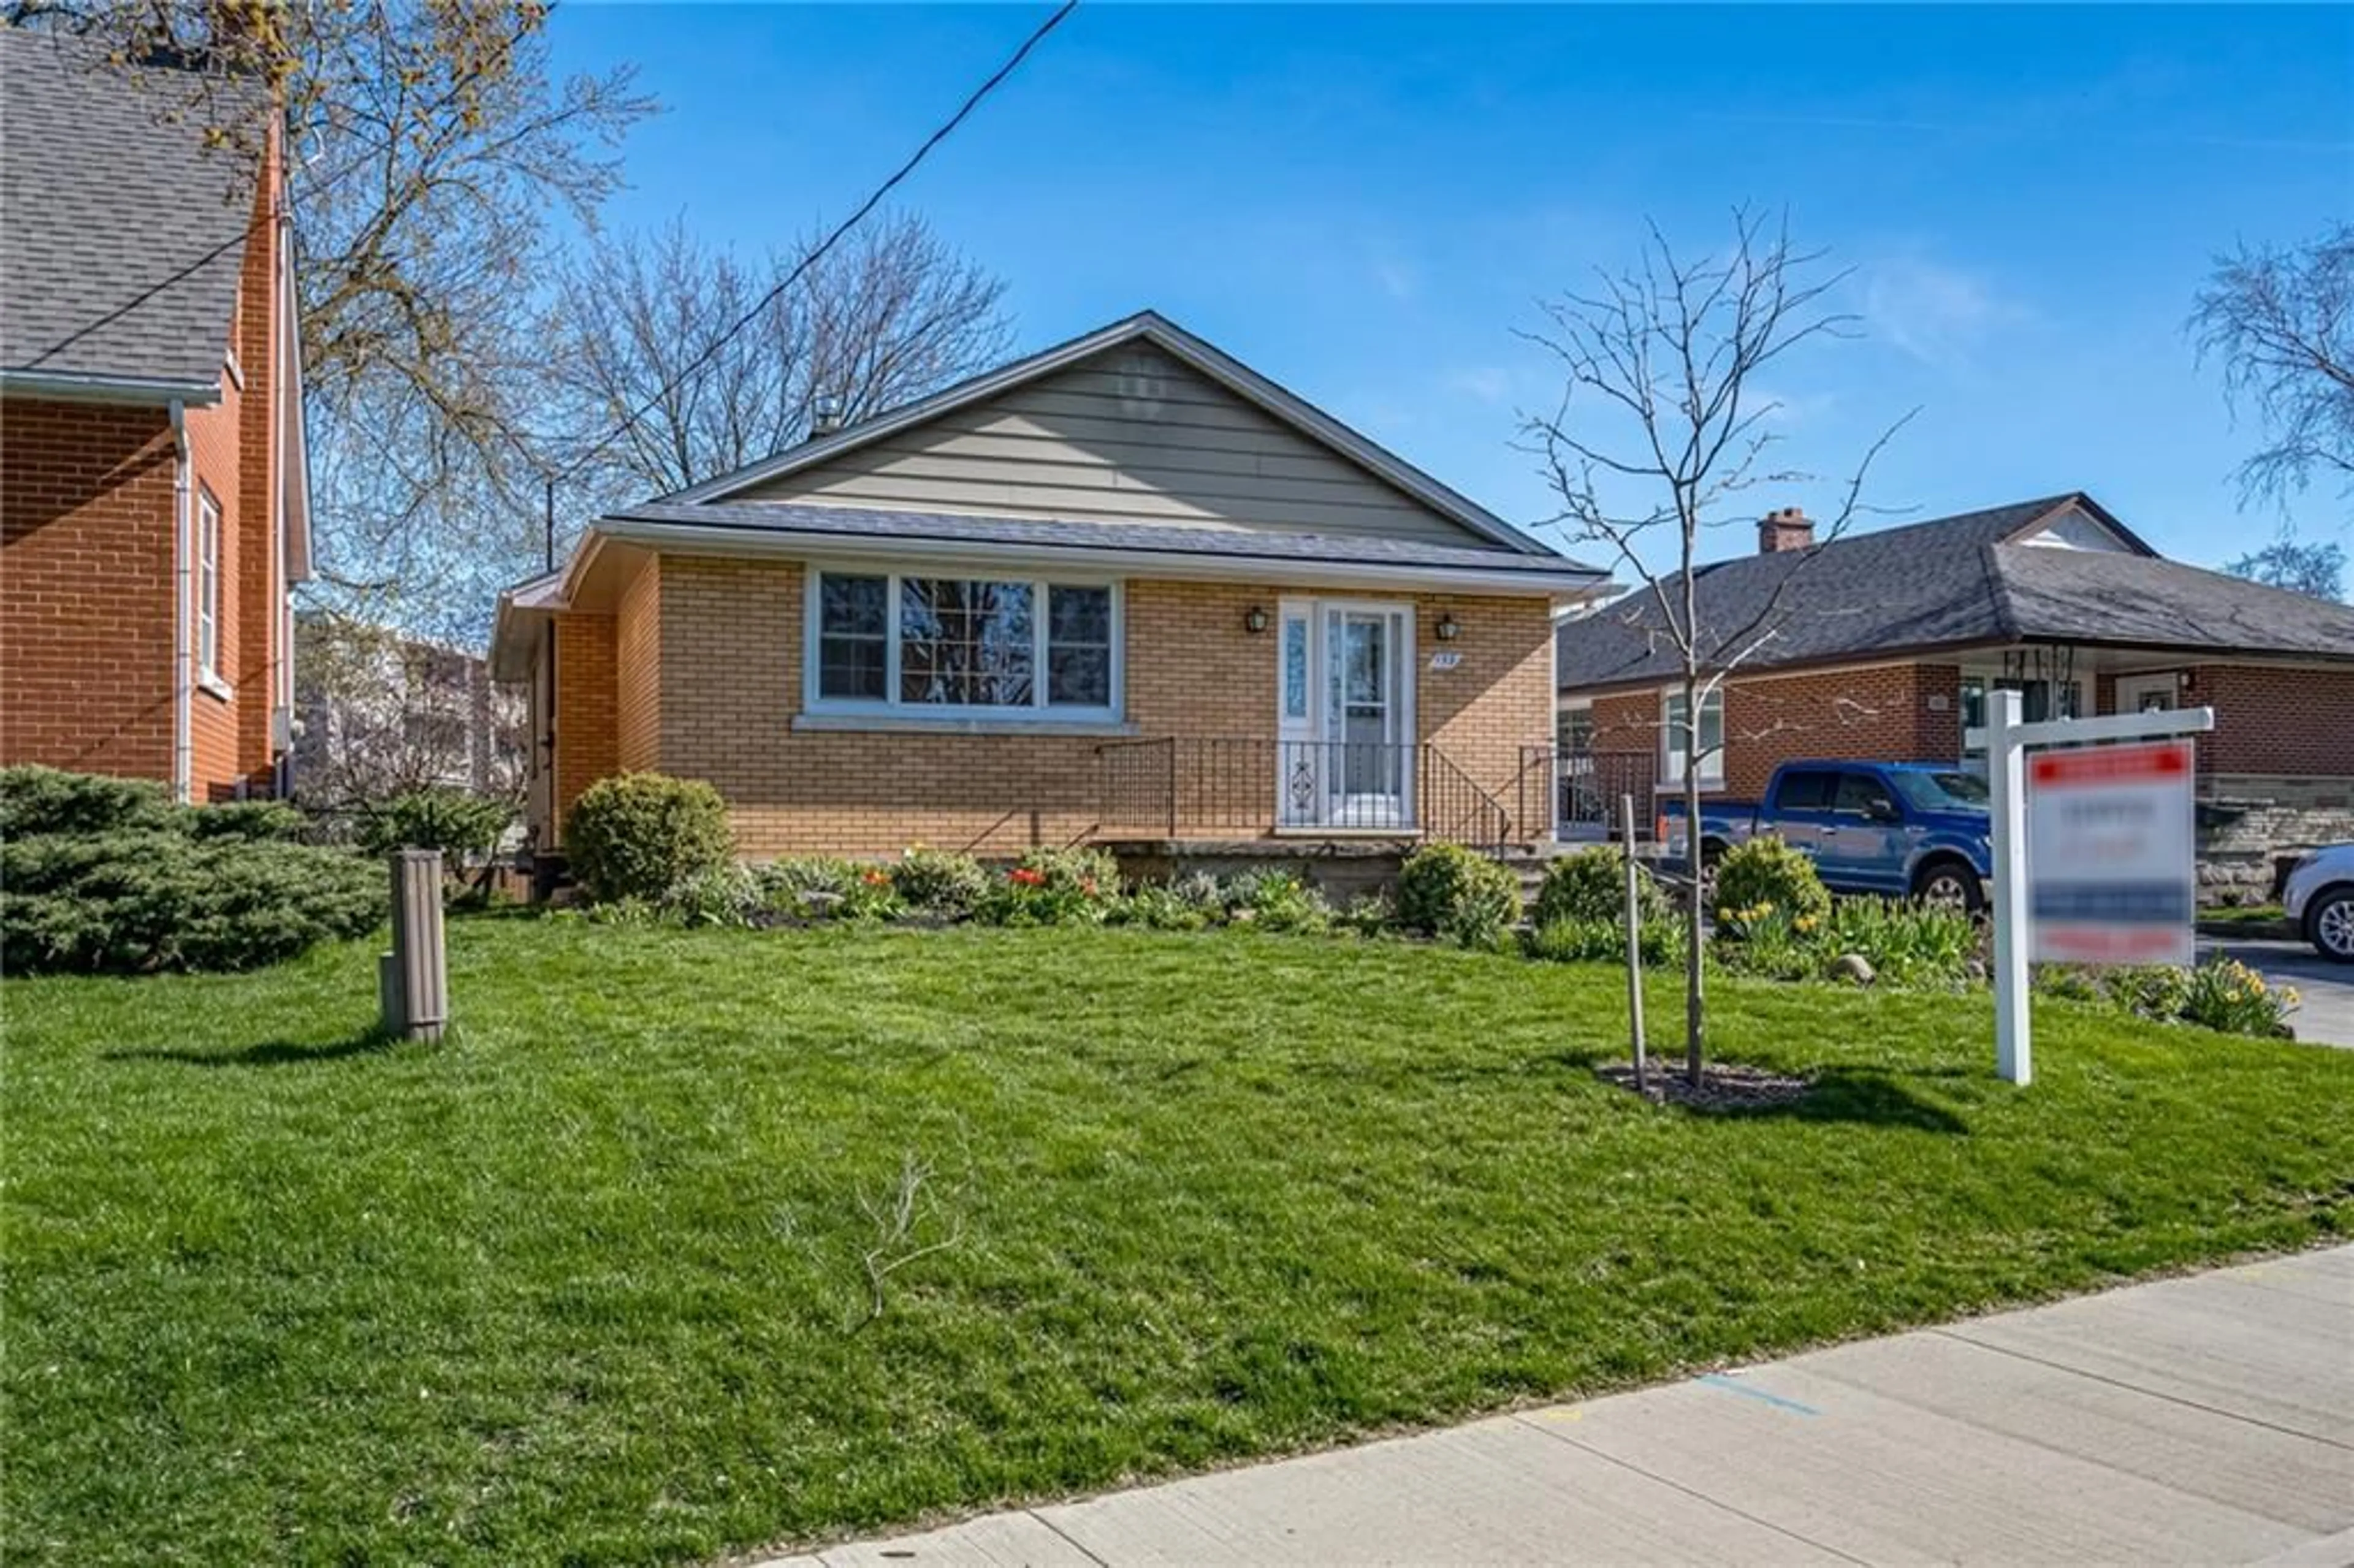 Frontside or backside of a home for 159 Heiman St, Kitchener Ontario N2M 3M1